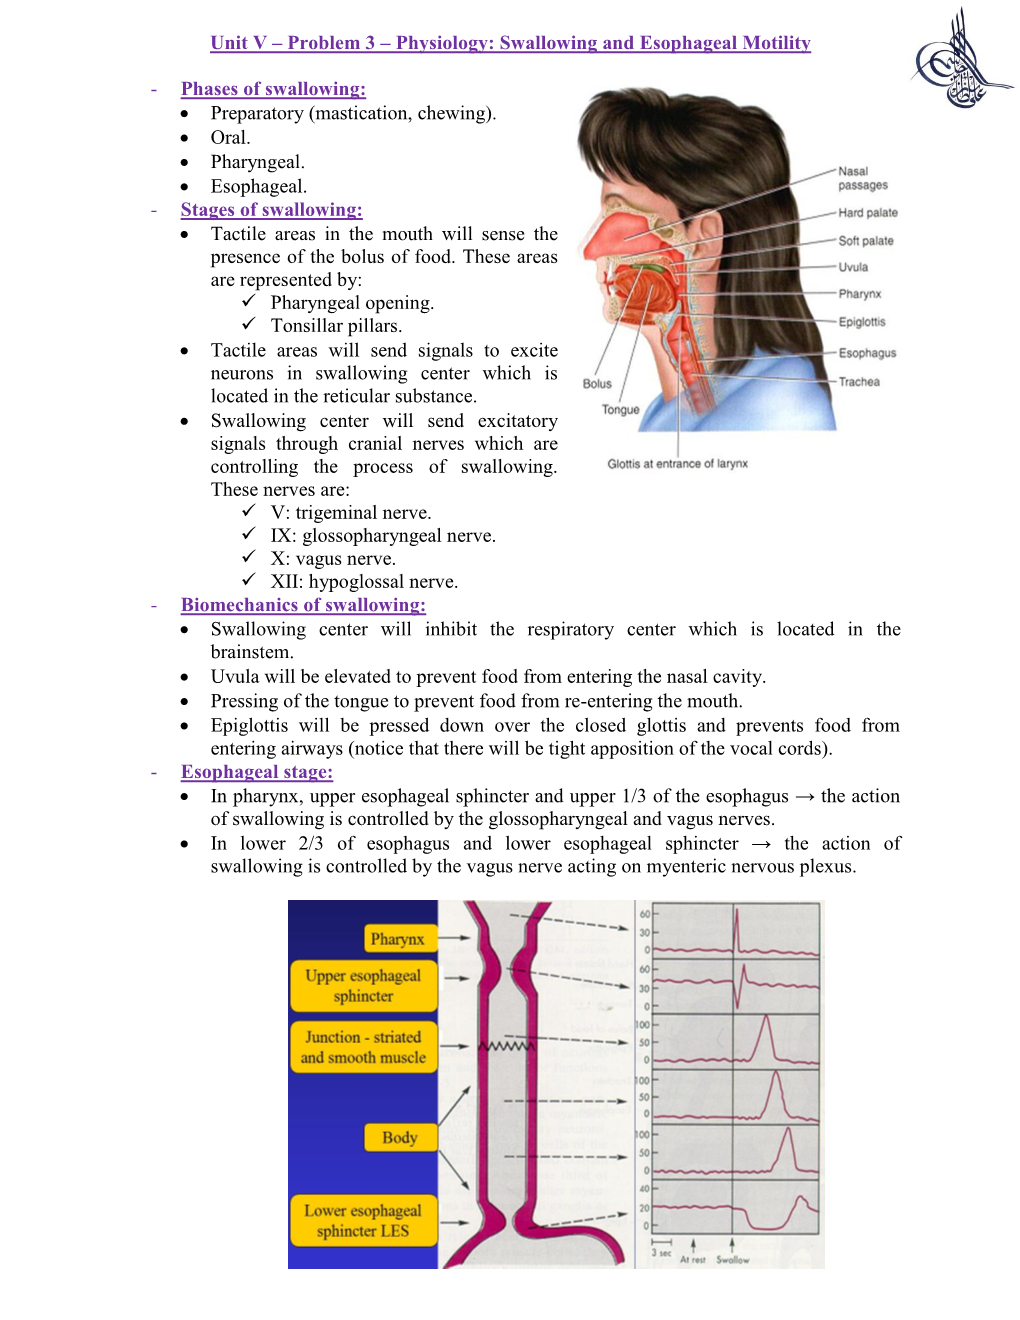 Unit V – Problem 3 – Physiology: Swallowing and Esophageal Motility